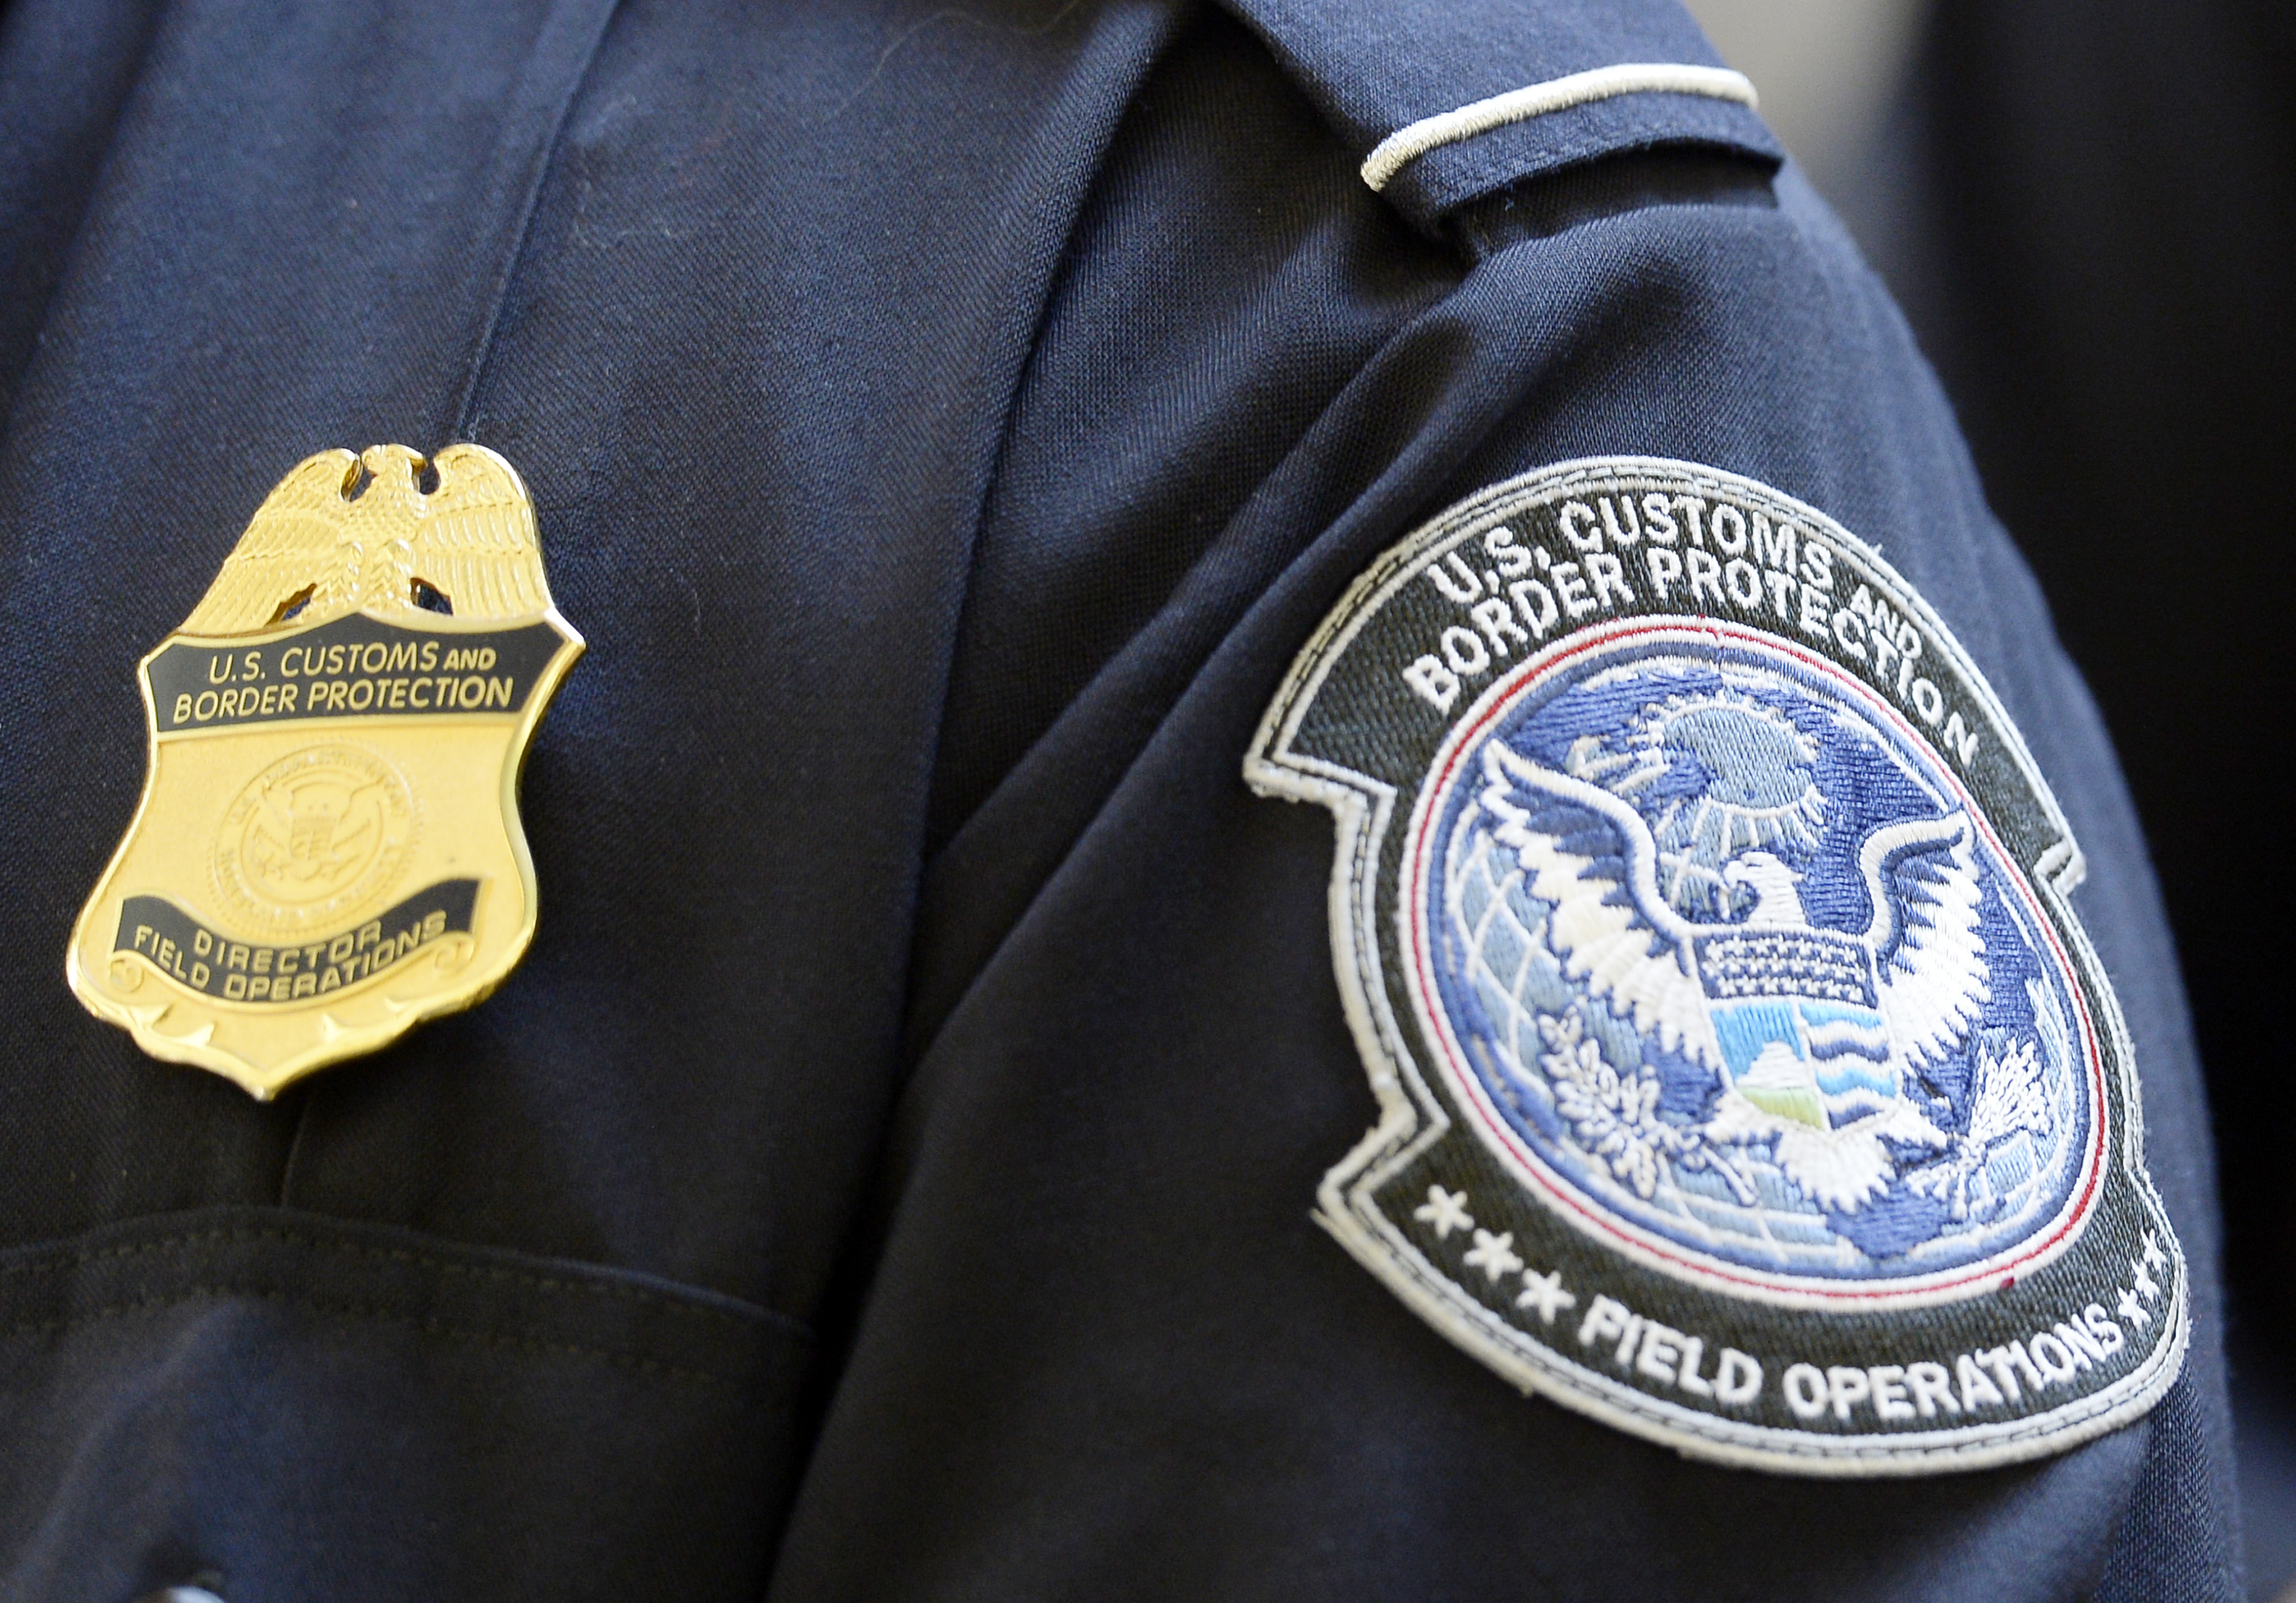 A U.S. Customs and Border Protection arm patch and badge is seen at Los Angeles International Airport